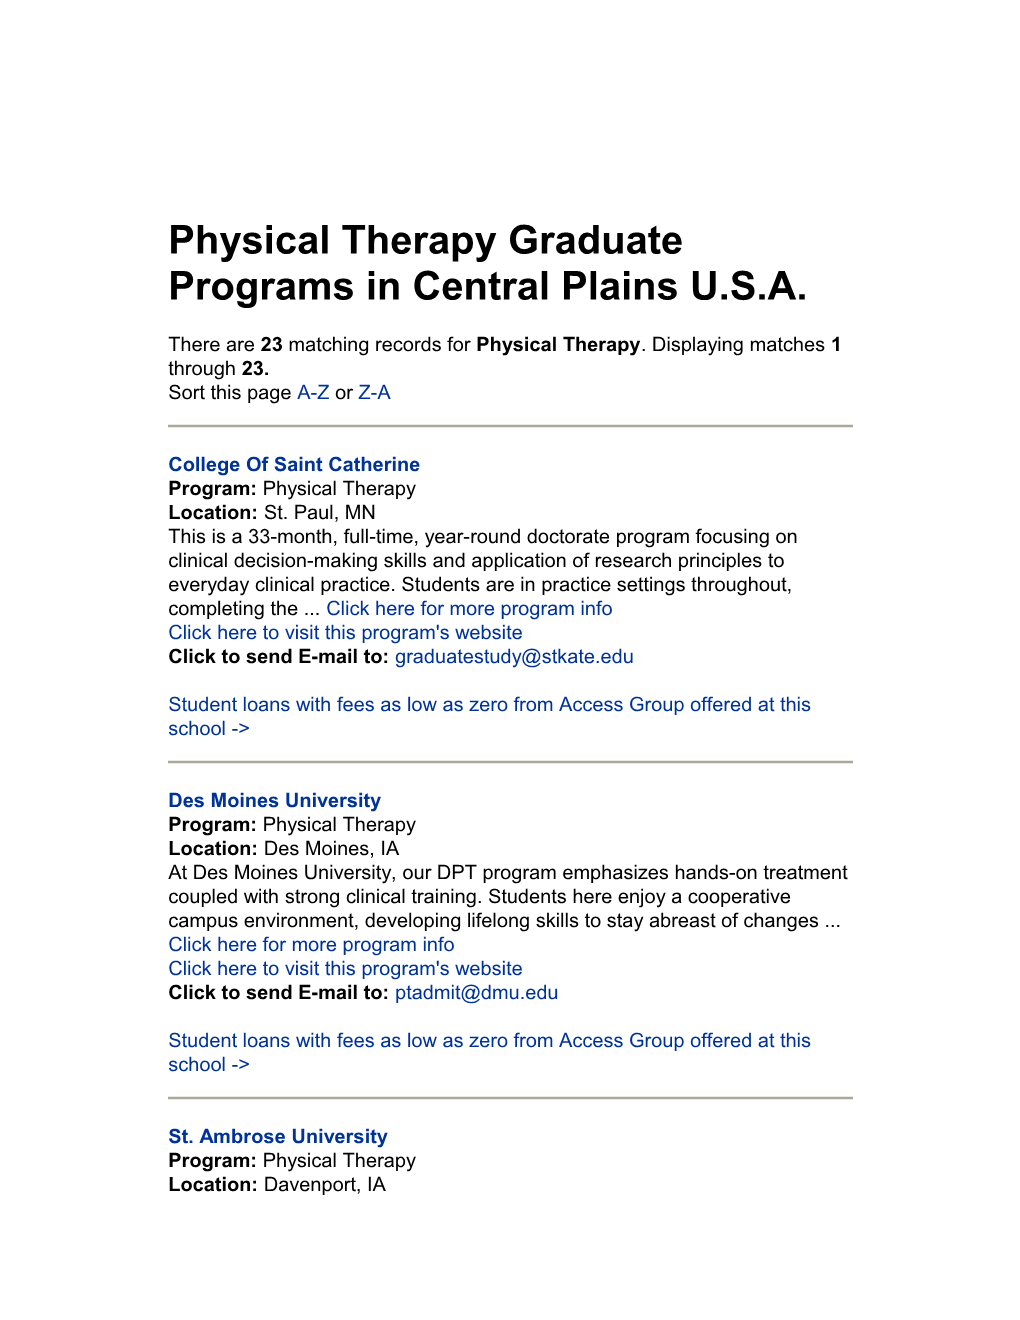 Physical Therapy Graduate Programs in Central Plains U.S.A